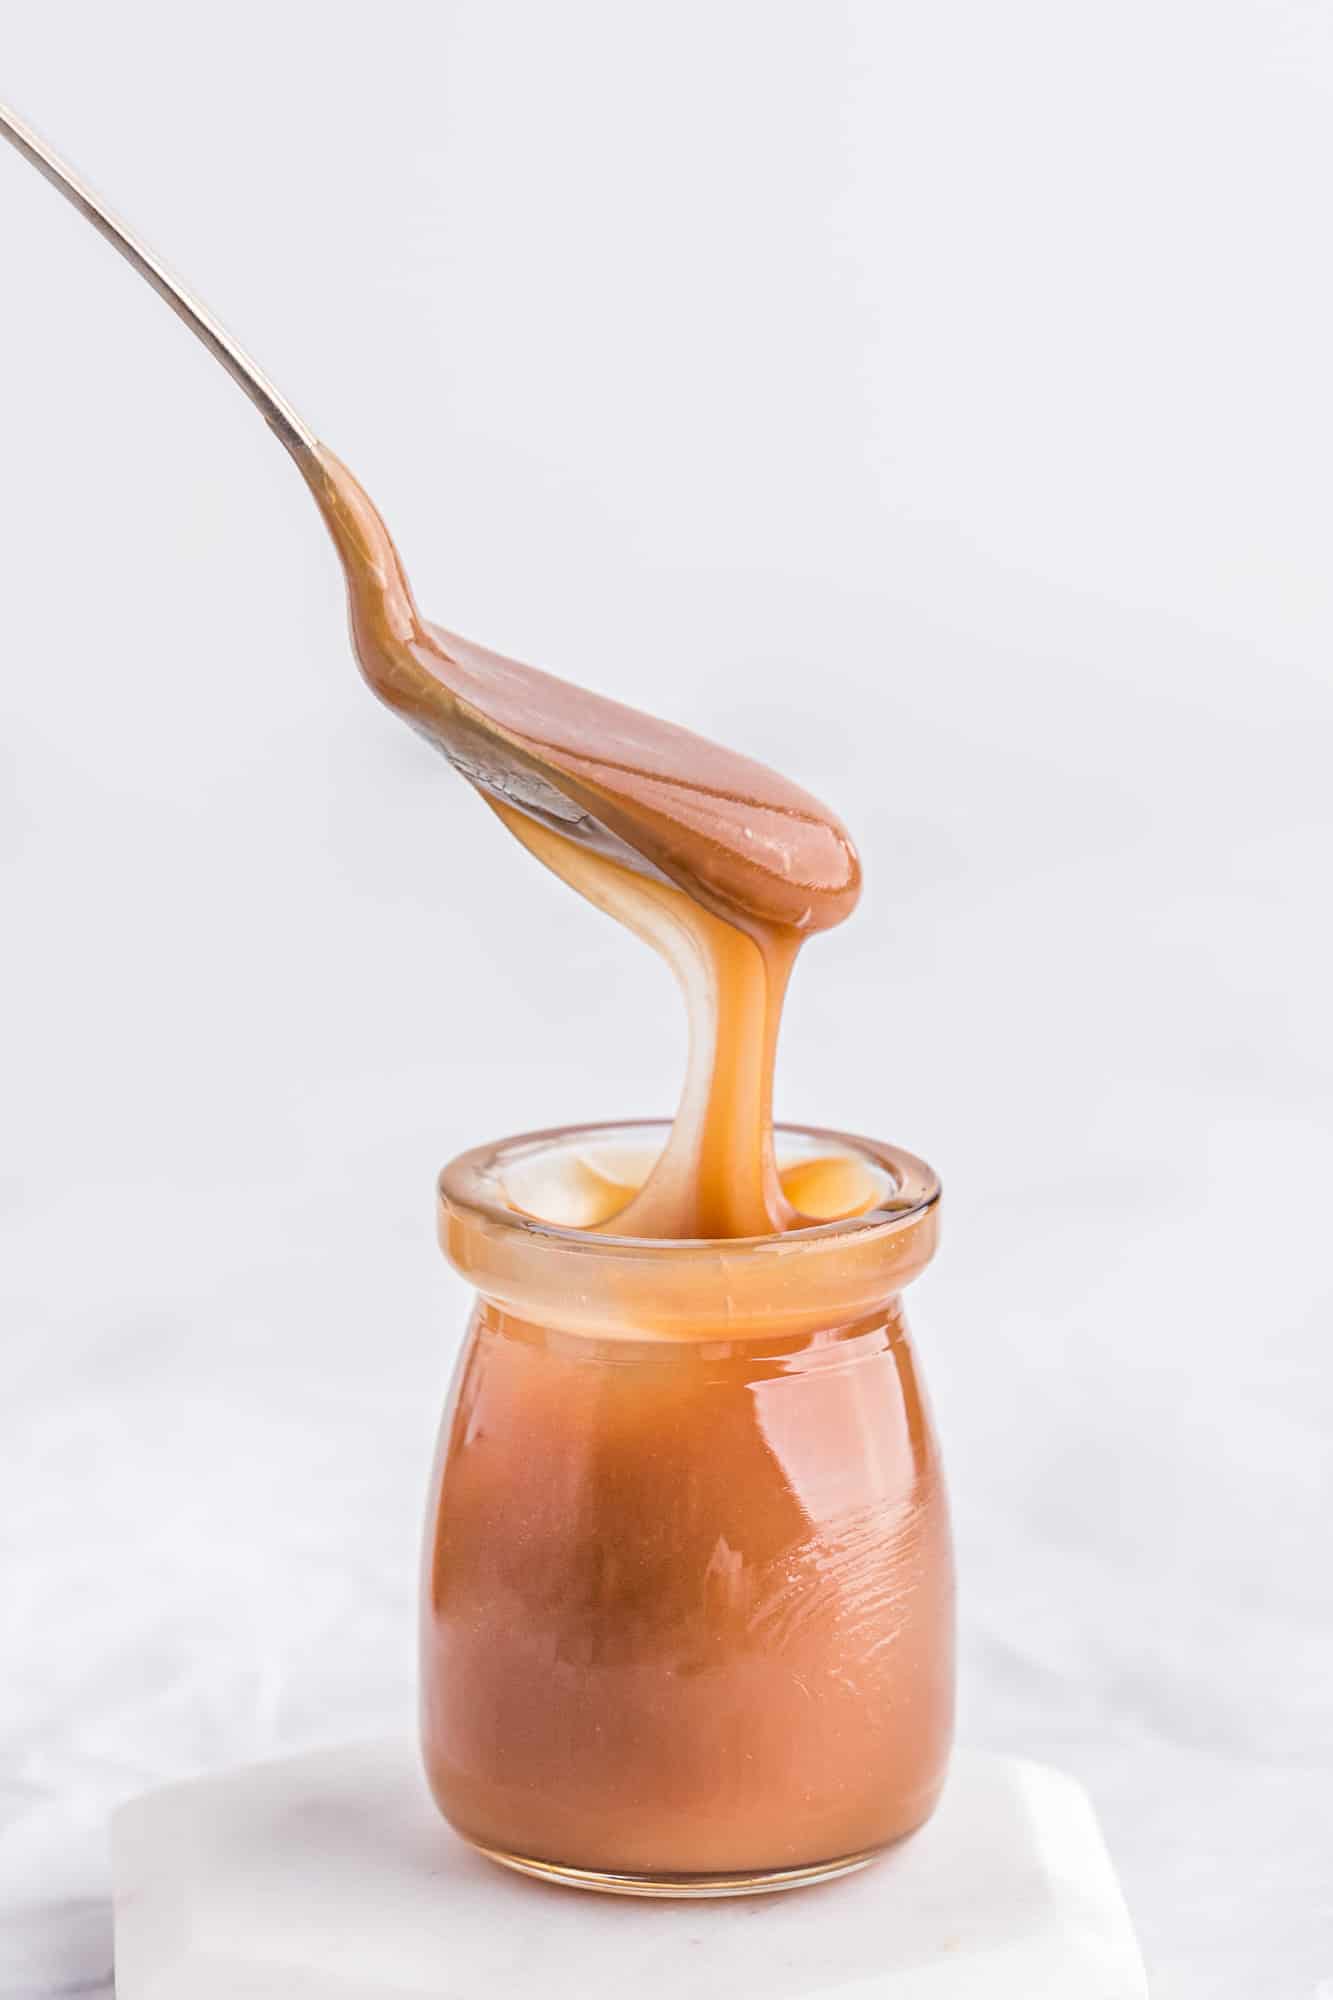 Caramel sauce in a jar, a spoon over it drizzling it into the jar.